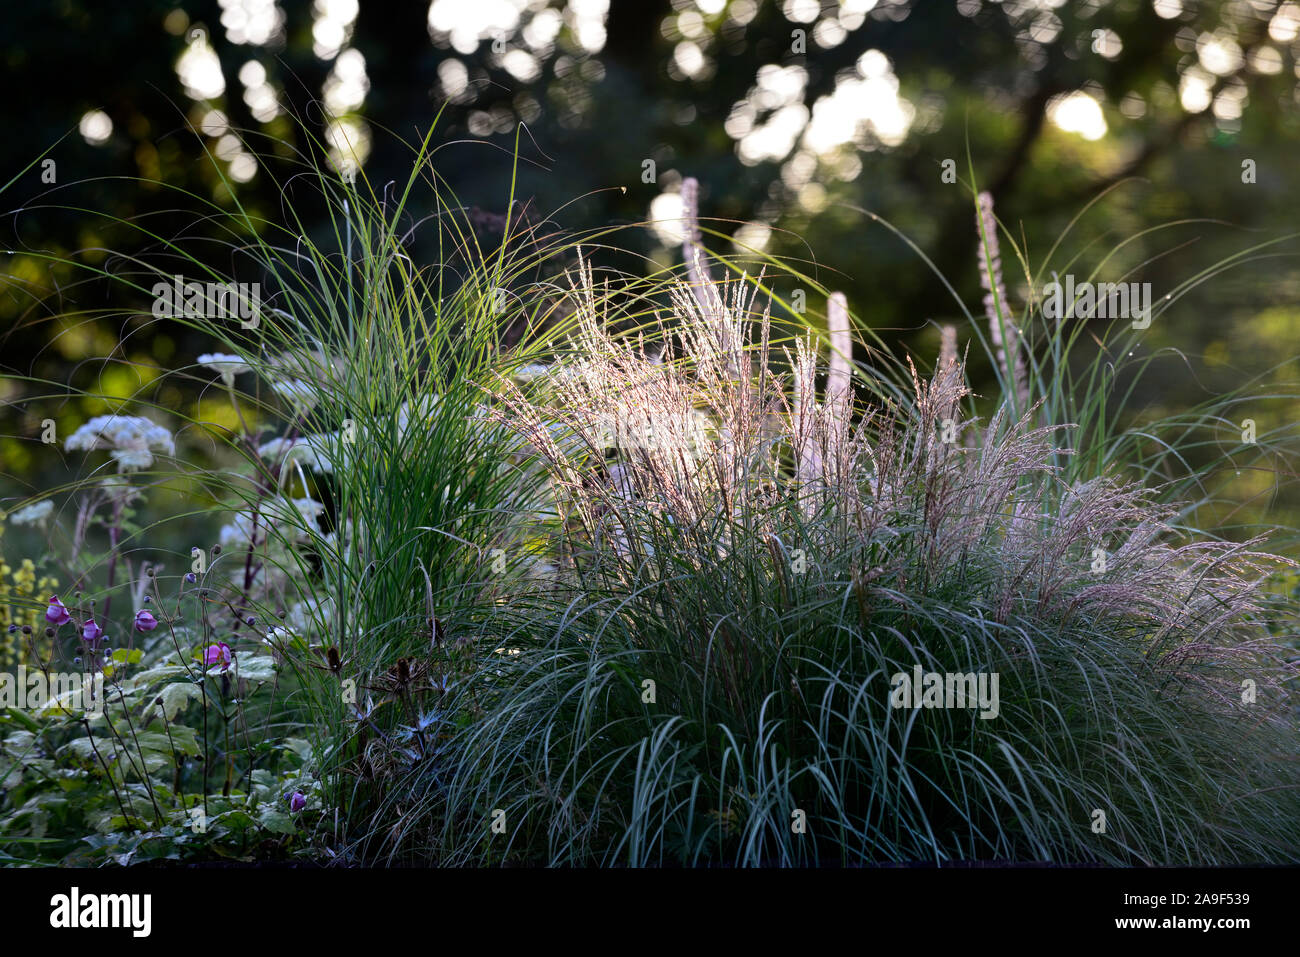 backlit grass,grasses,backlighting,dawn light,ornamental grasses,glow,glowing,RM Floral Stock Photo